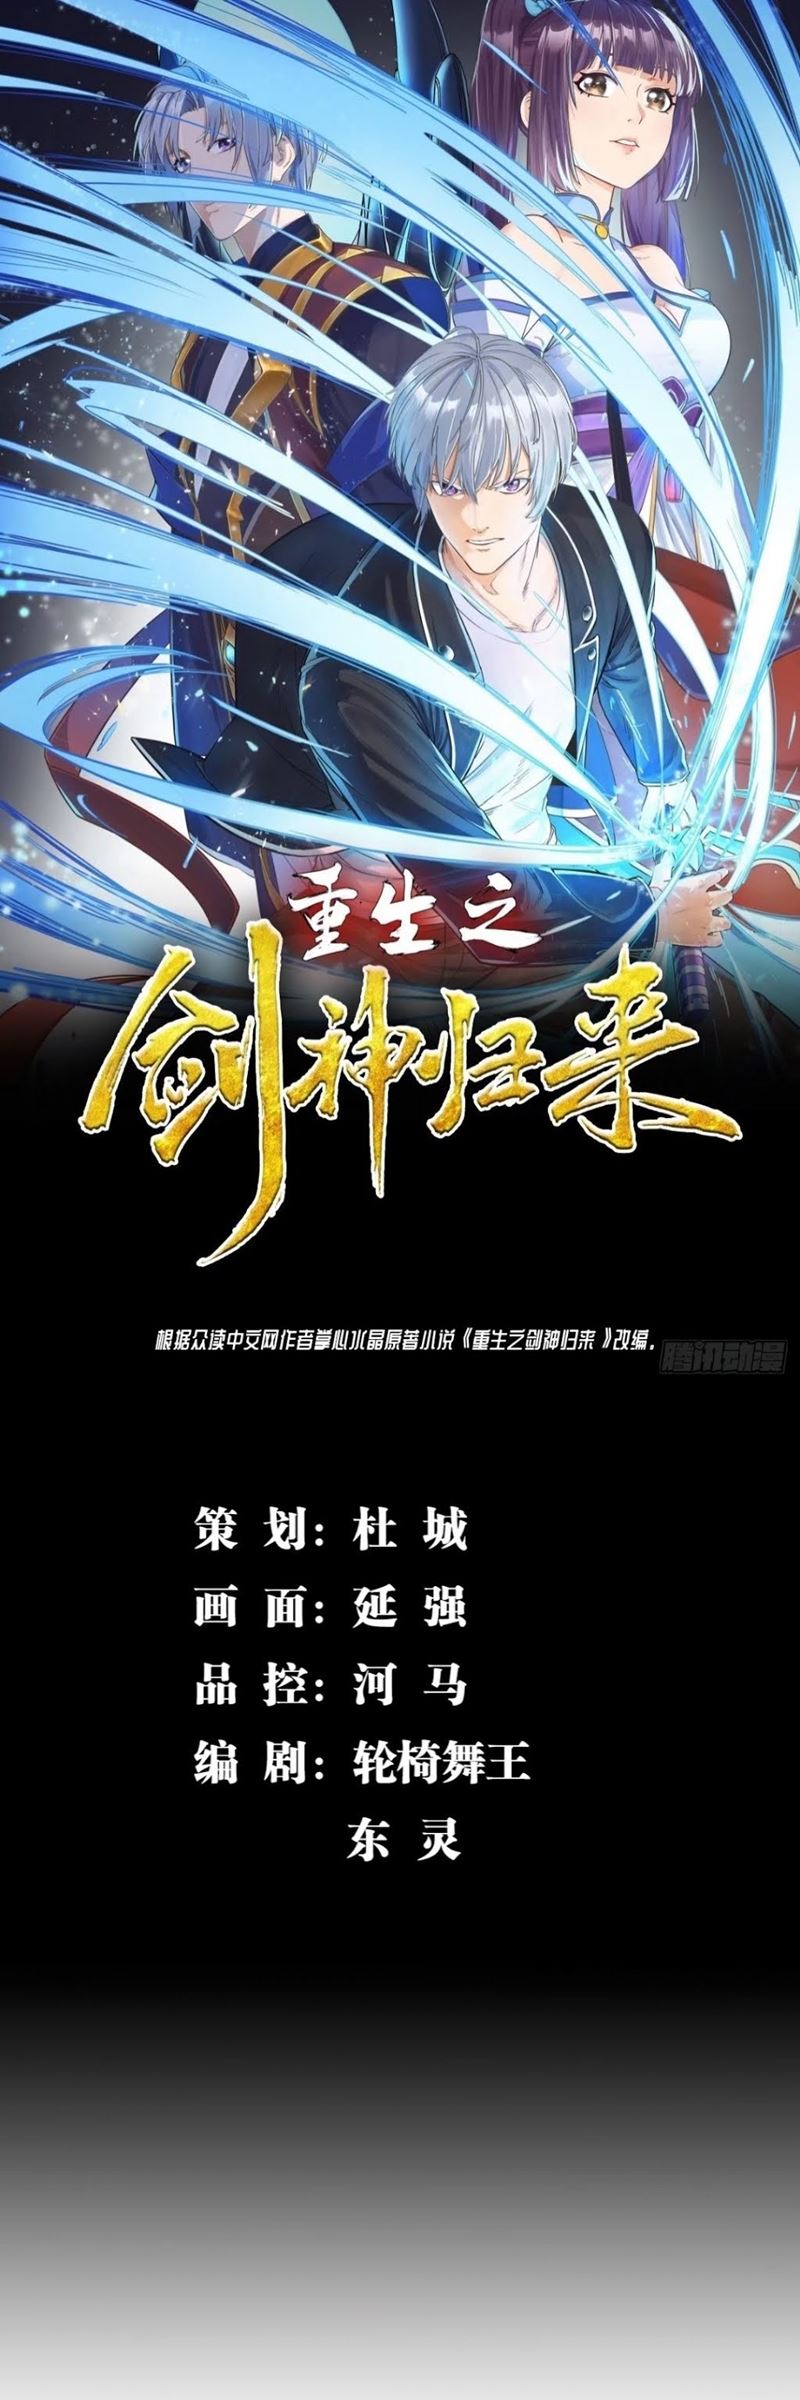 Rebirth of The Sword God Returns Chapter 10 2